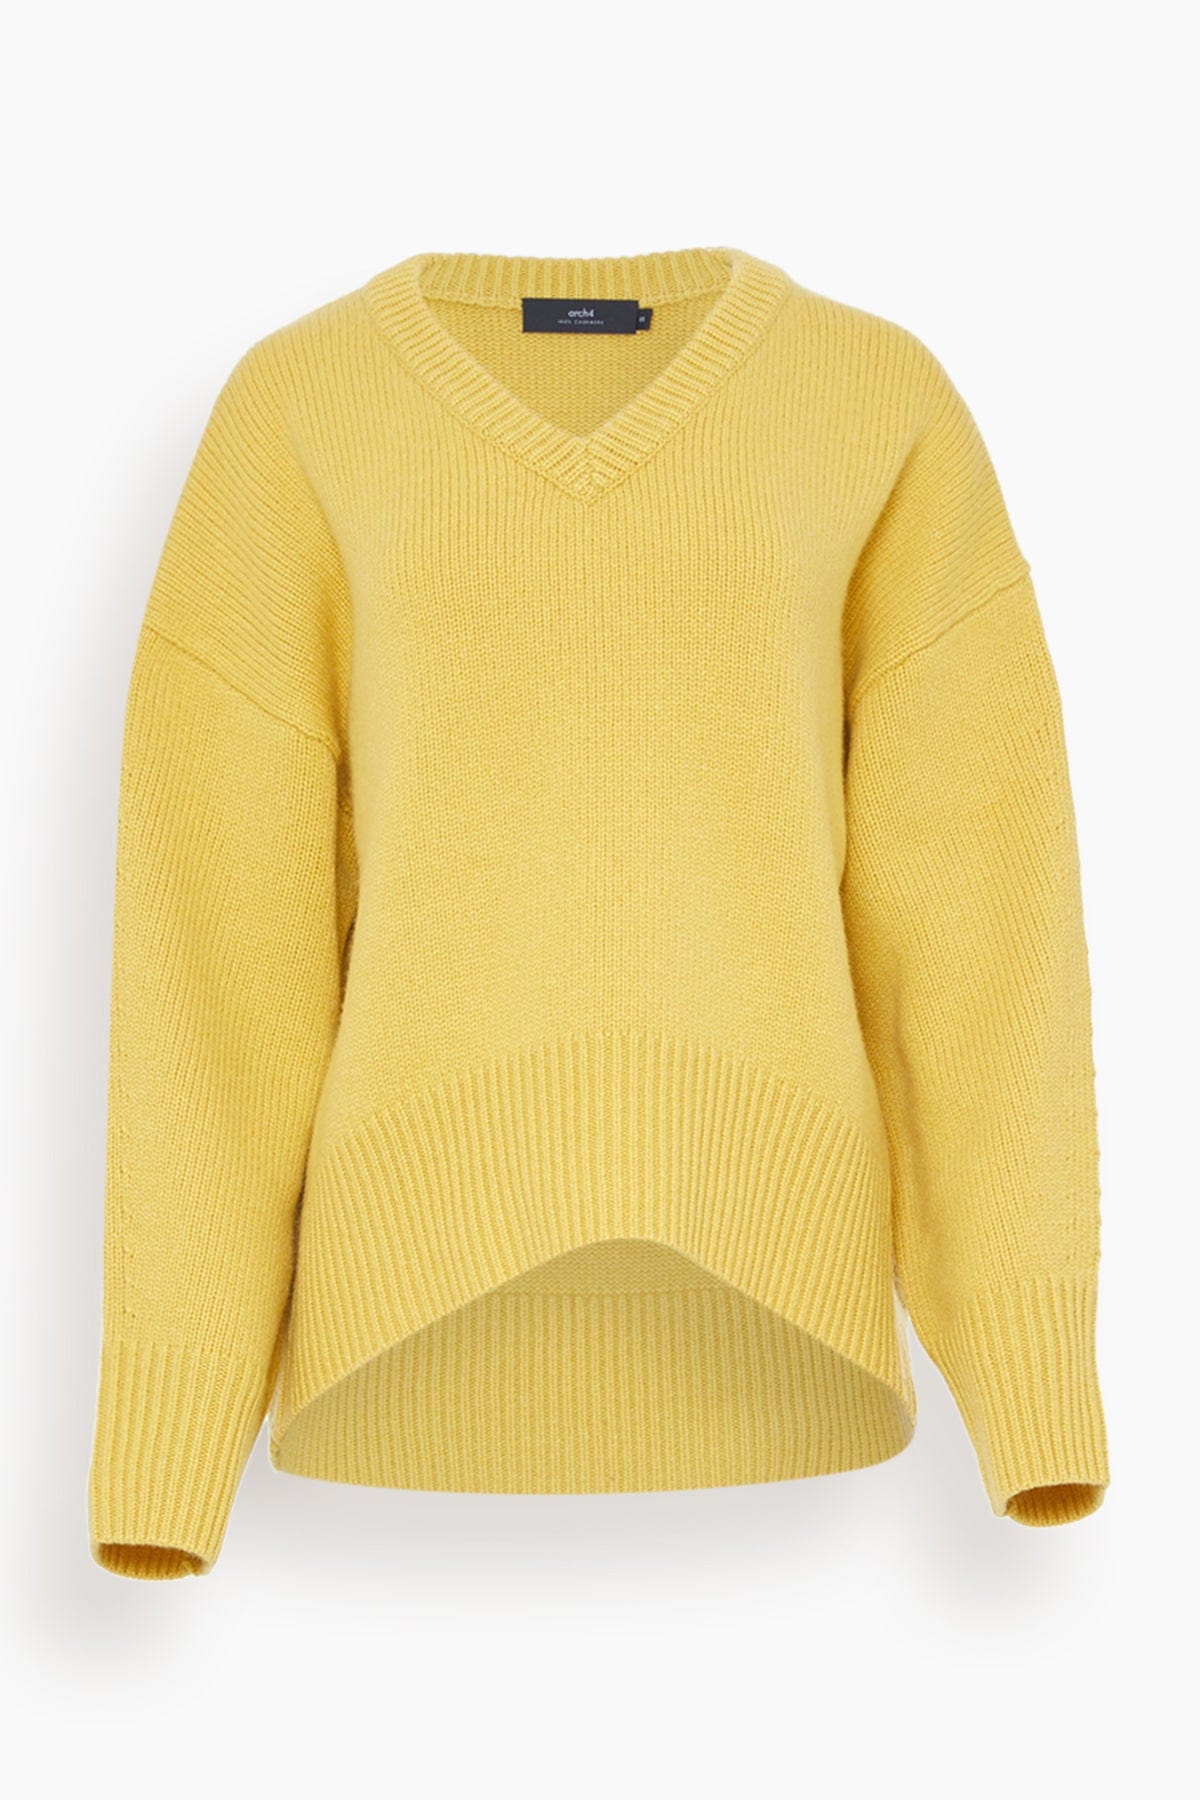 Arch 4 Sweaters Battersea Sweater in Canary Yellow